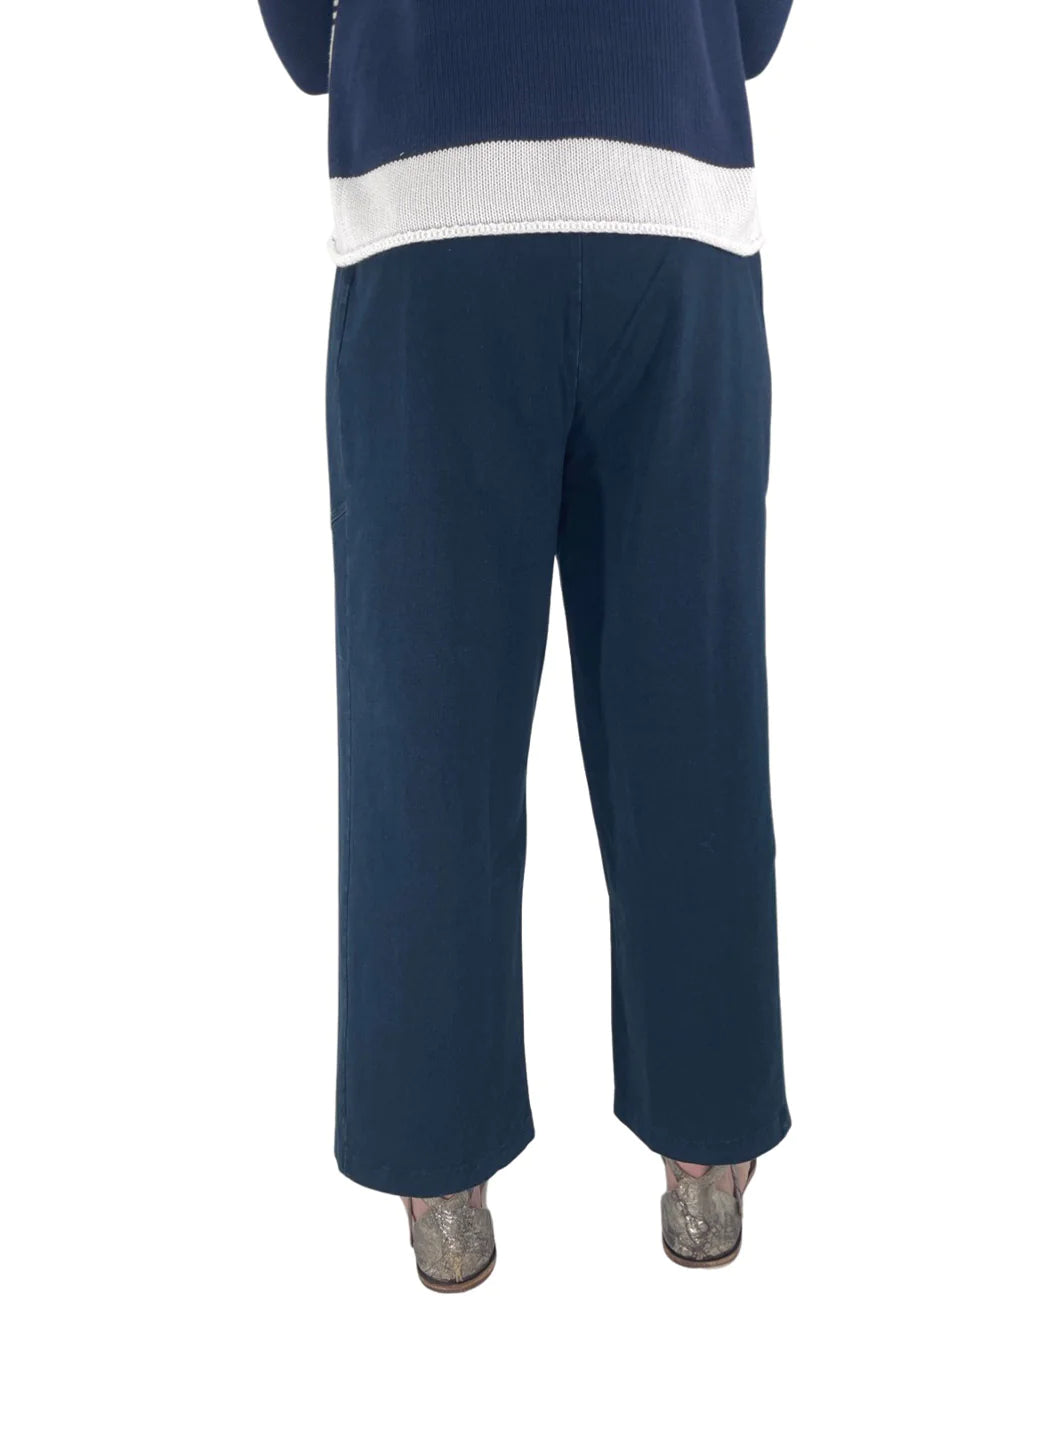 Spring Forward Apparel Sale! - Stone Washed Flood Pant in Denim by